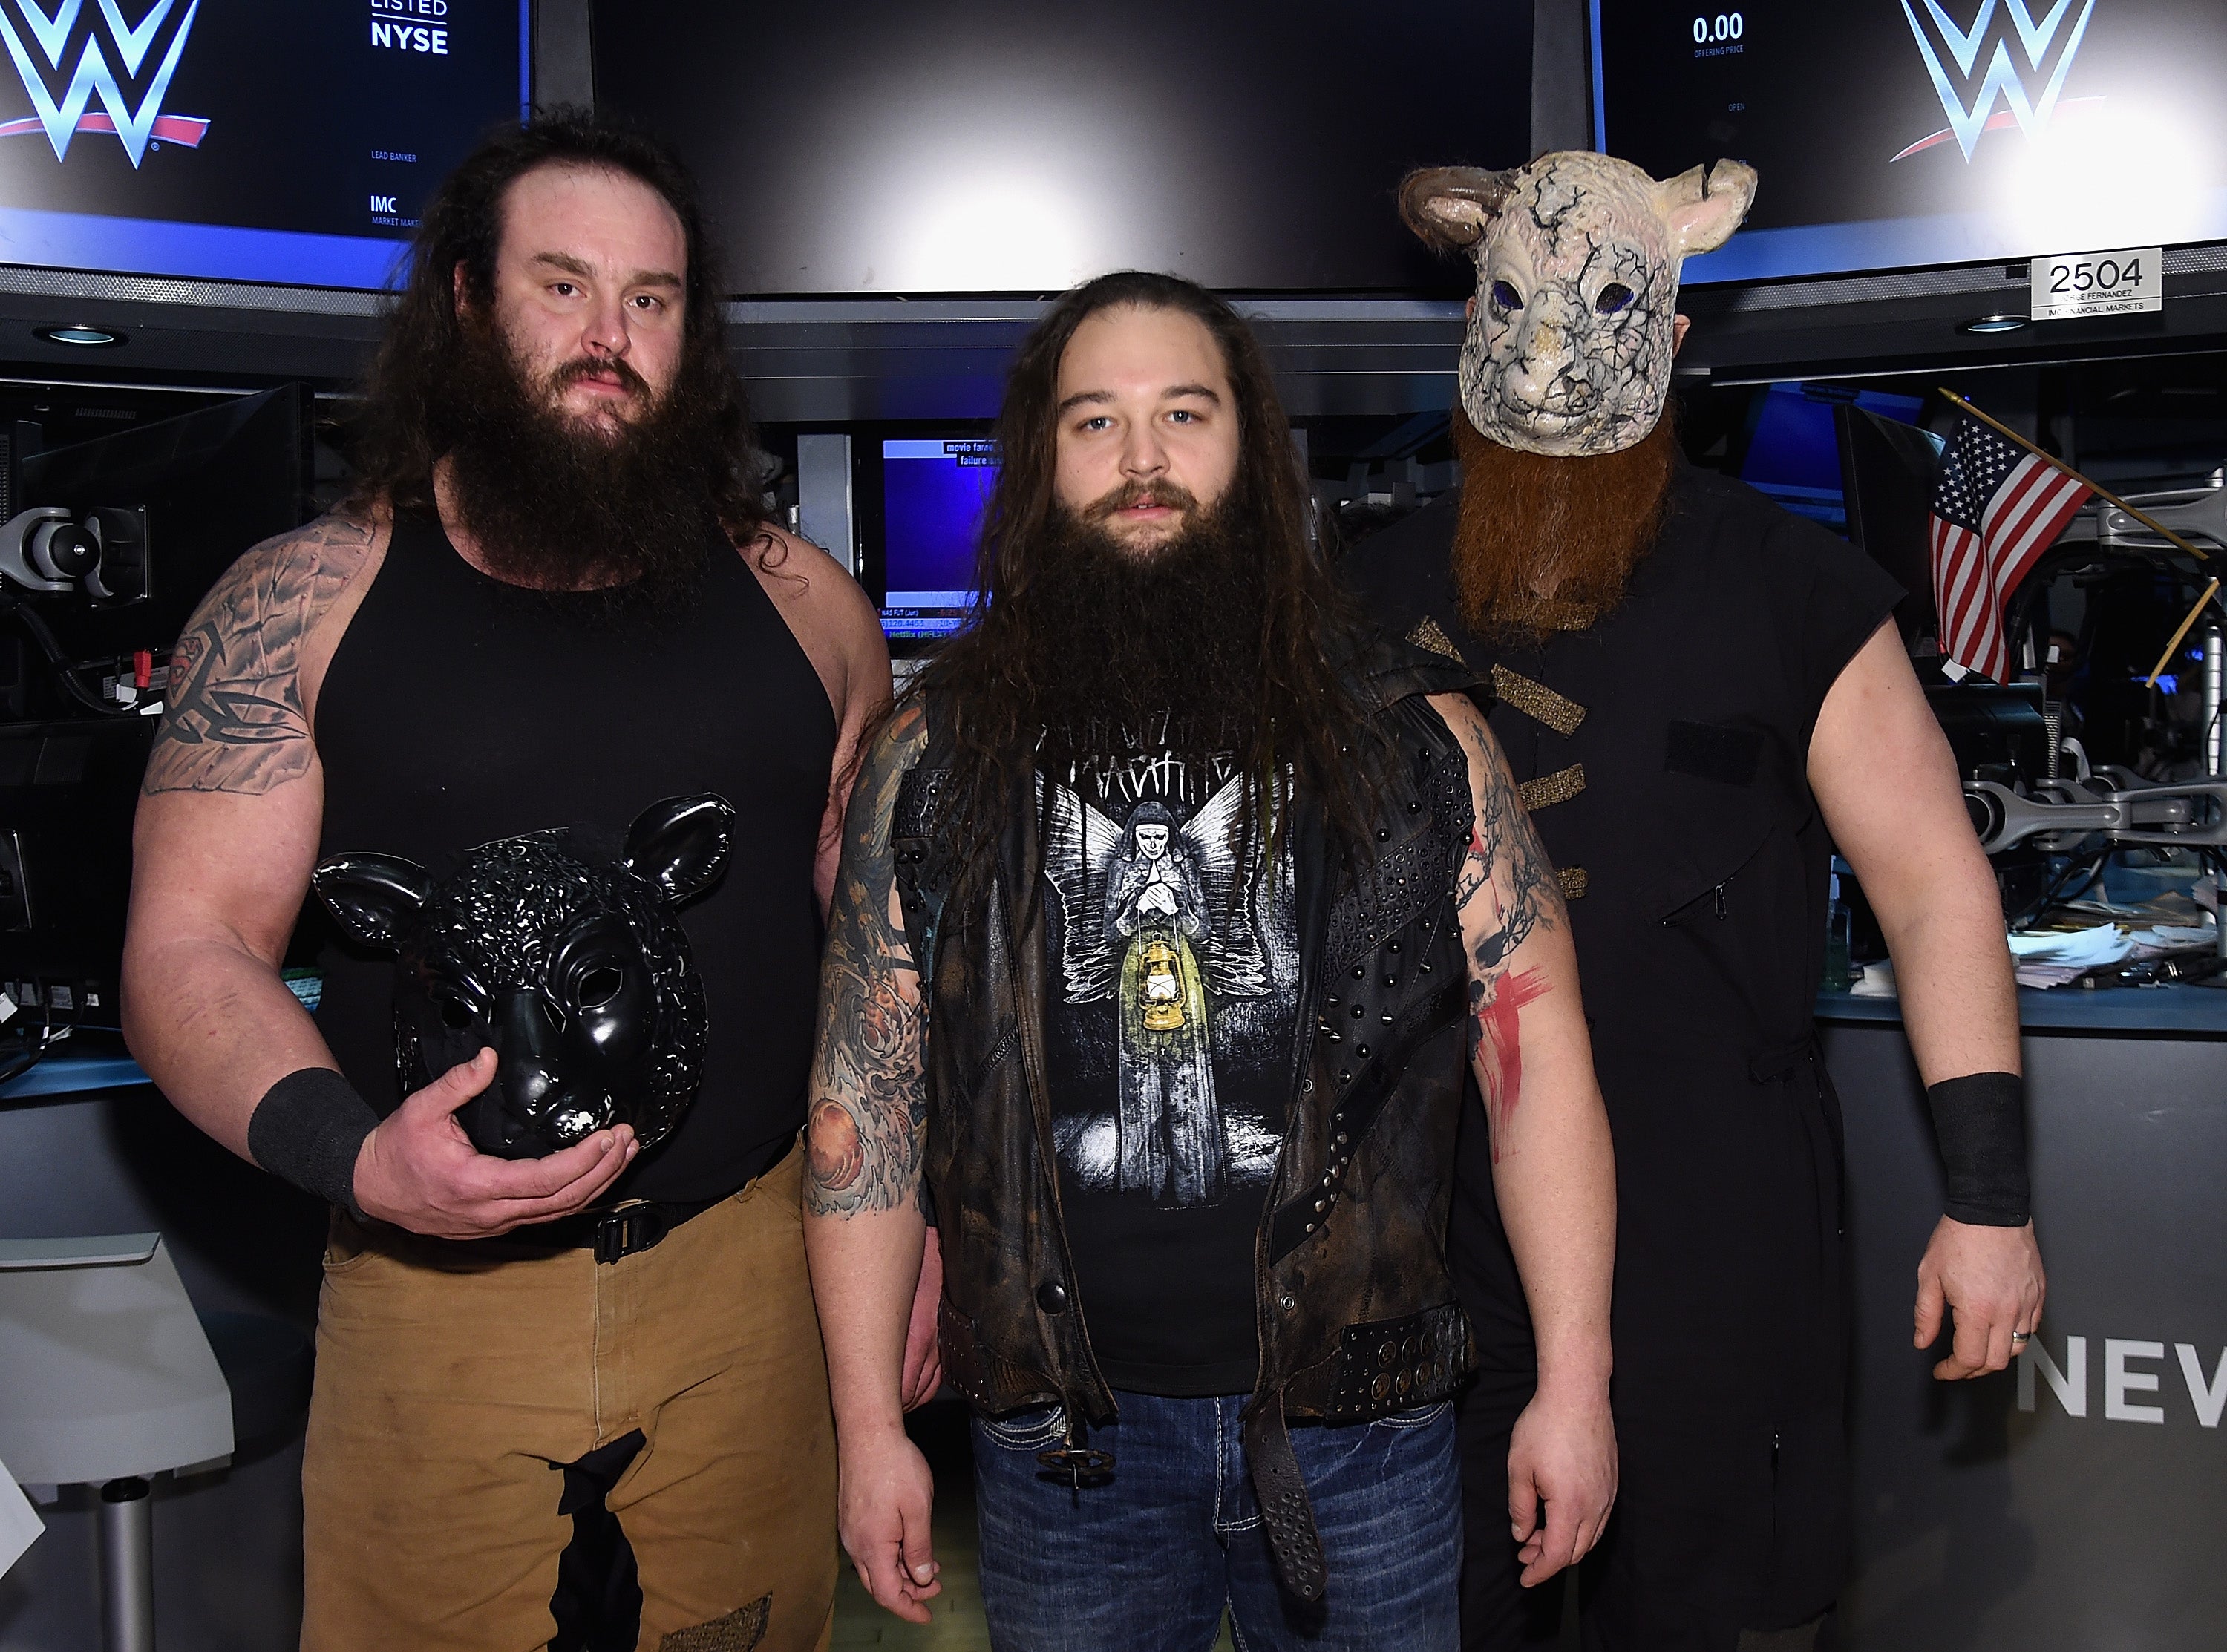 The Wyatt Family had a number of memorable moments